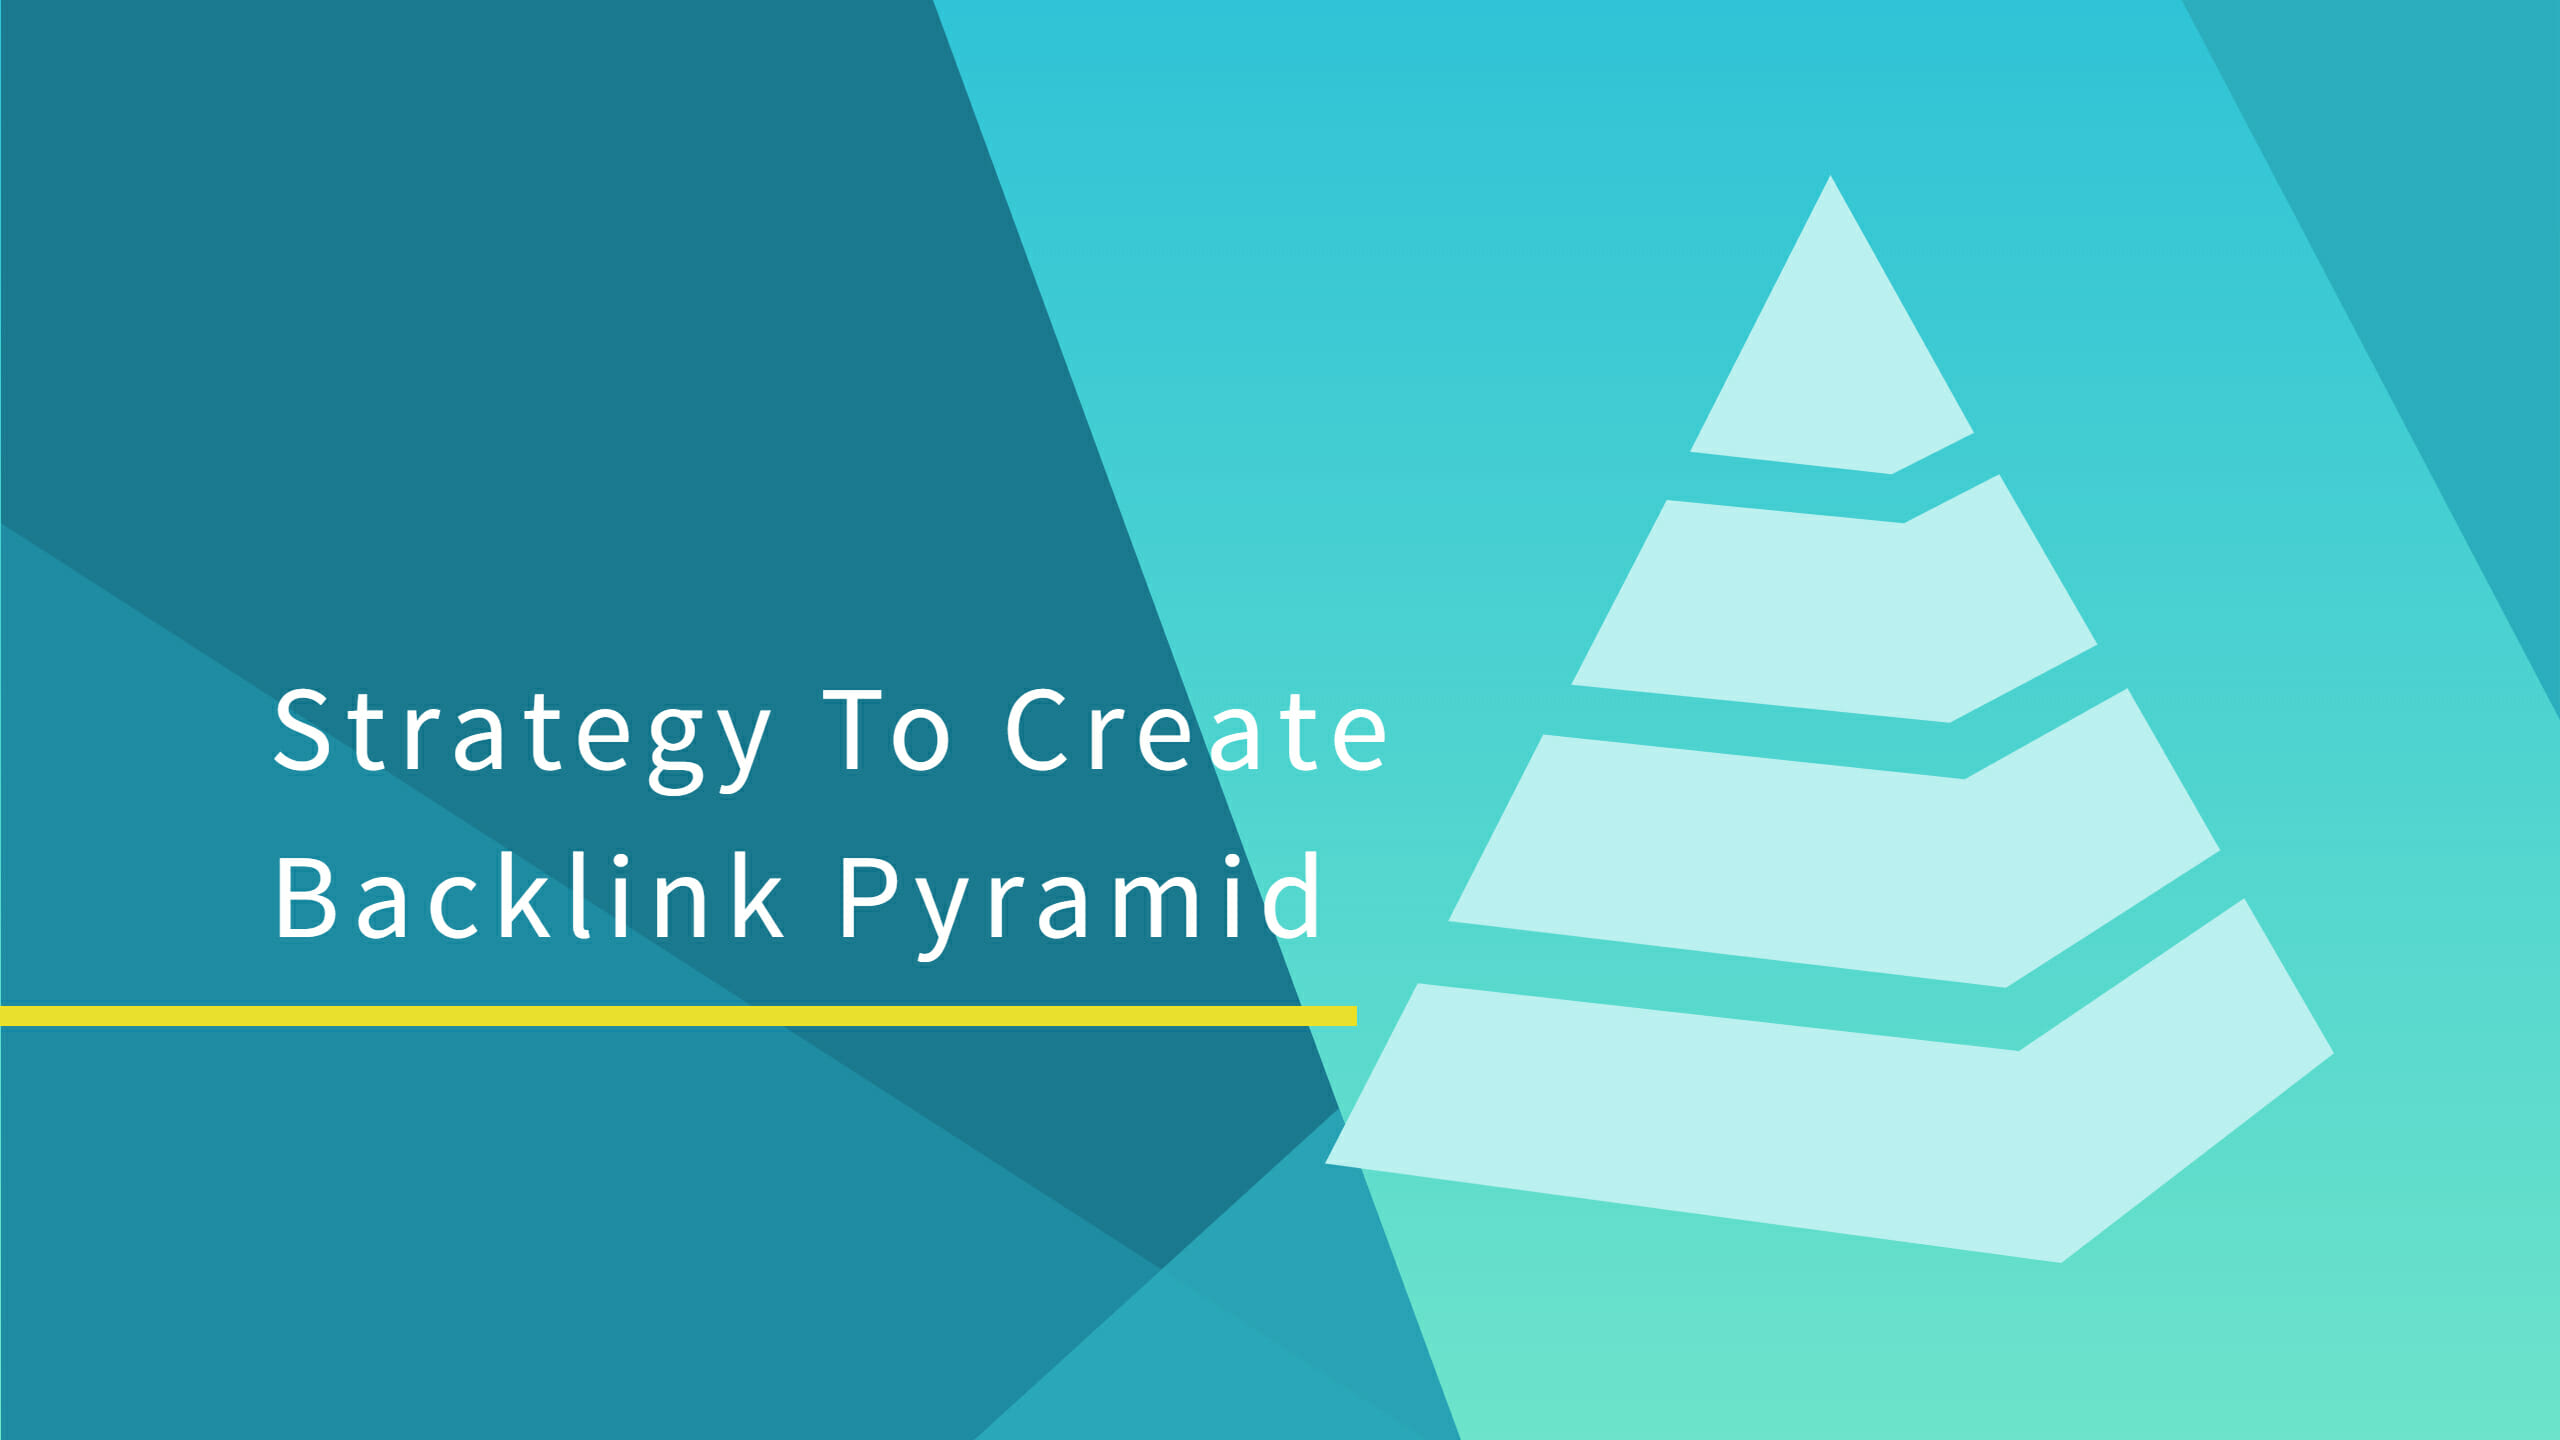 Here checkout the Relevant steps Backlinks Pyramid